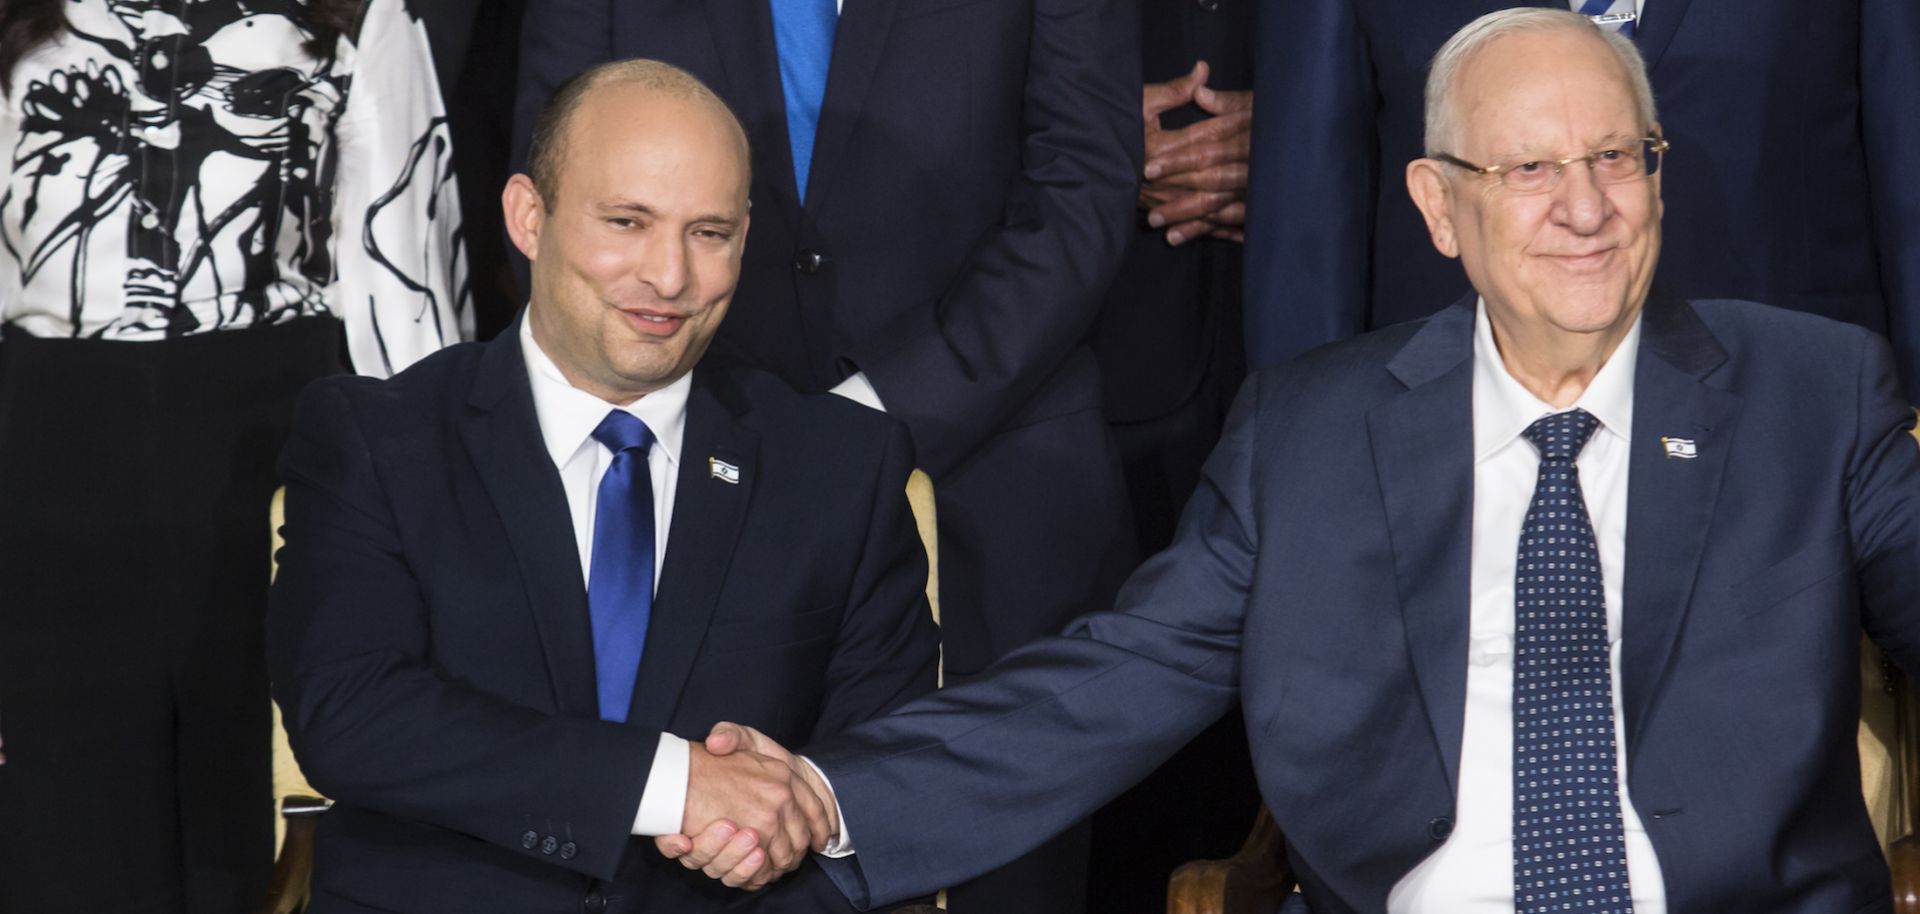 Israeli President Reuven Rivlin shakes hands with Prime Minister Naftali Bennett during the official swearing-in of Israel’s new government on June 14, 2021. 